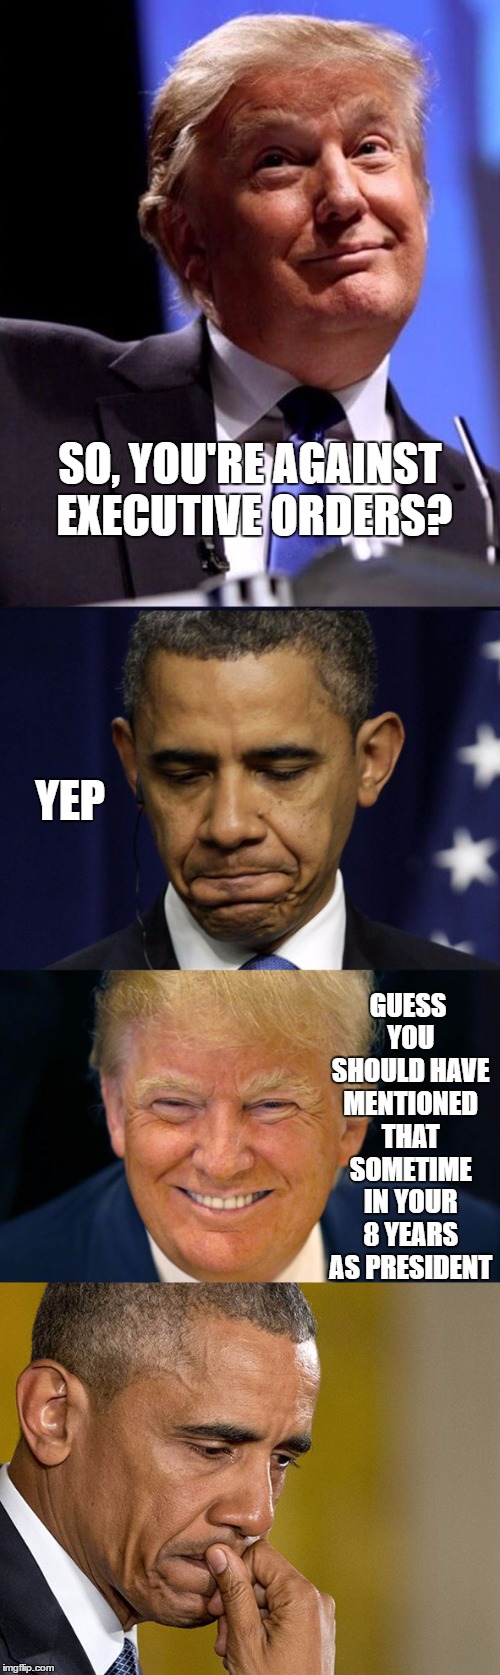 Trump Obama | SO, YOU'RE AGAINST EXECUTIVE ORDERS? YEP; GUESS YOU SHOULD HAVE MENTIONED THAT SOMETIME IN YOUR 8 YEARS AS PRESIDENT | image tagged in trump obama,random,trump executive orders,obama executive orders,president trump,president | made w/ Imgflip meme maker